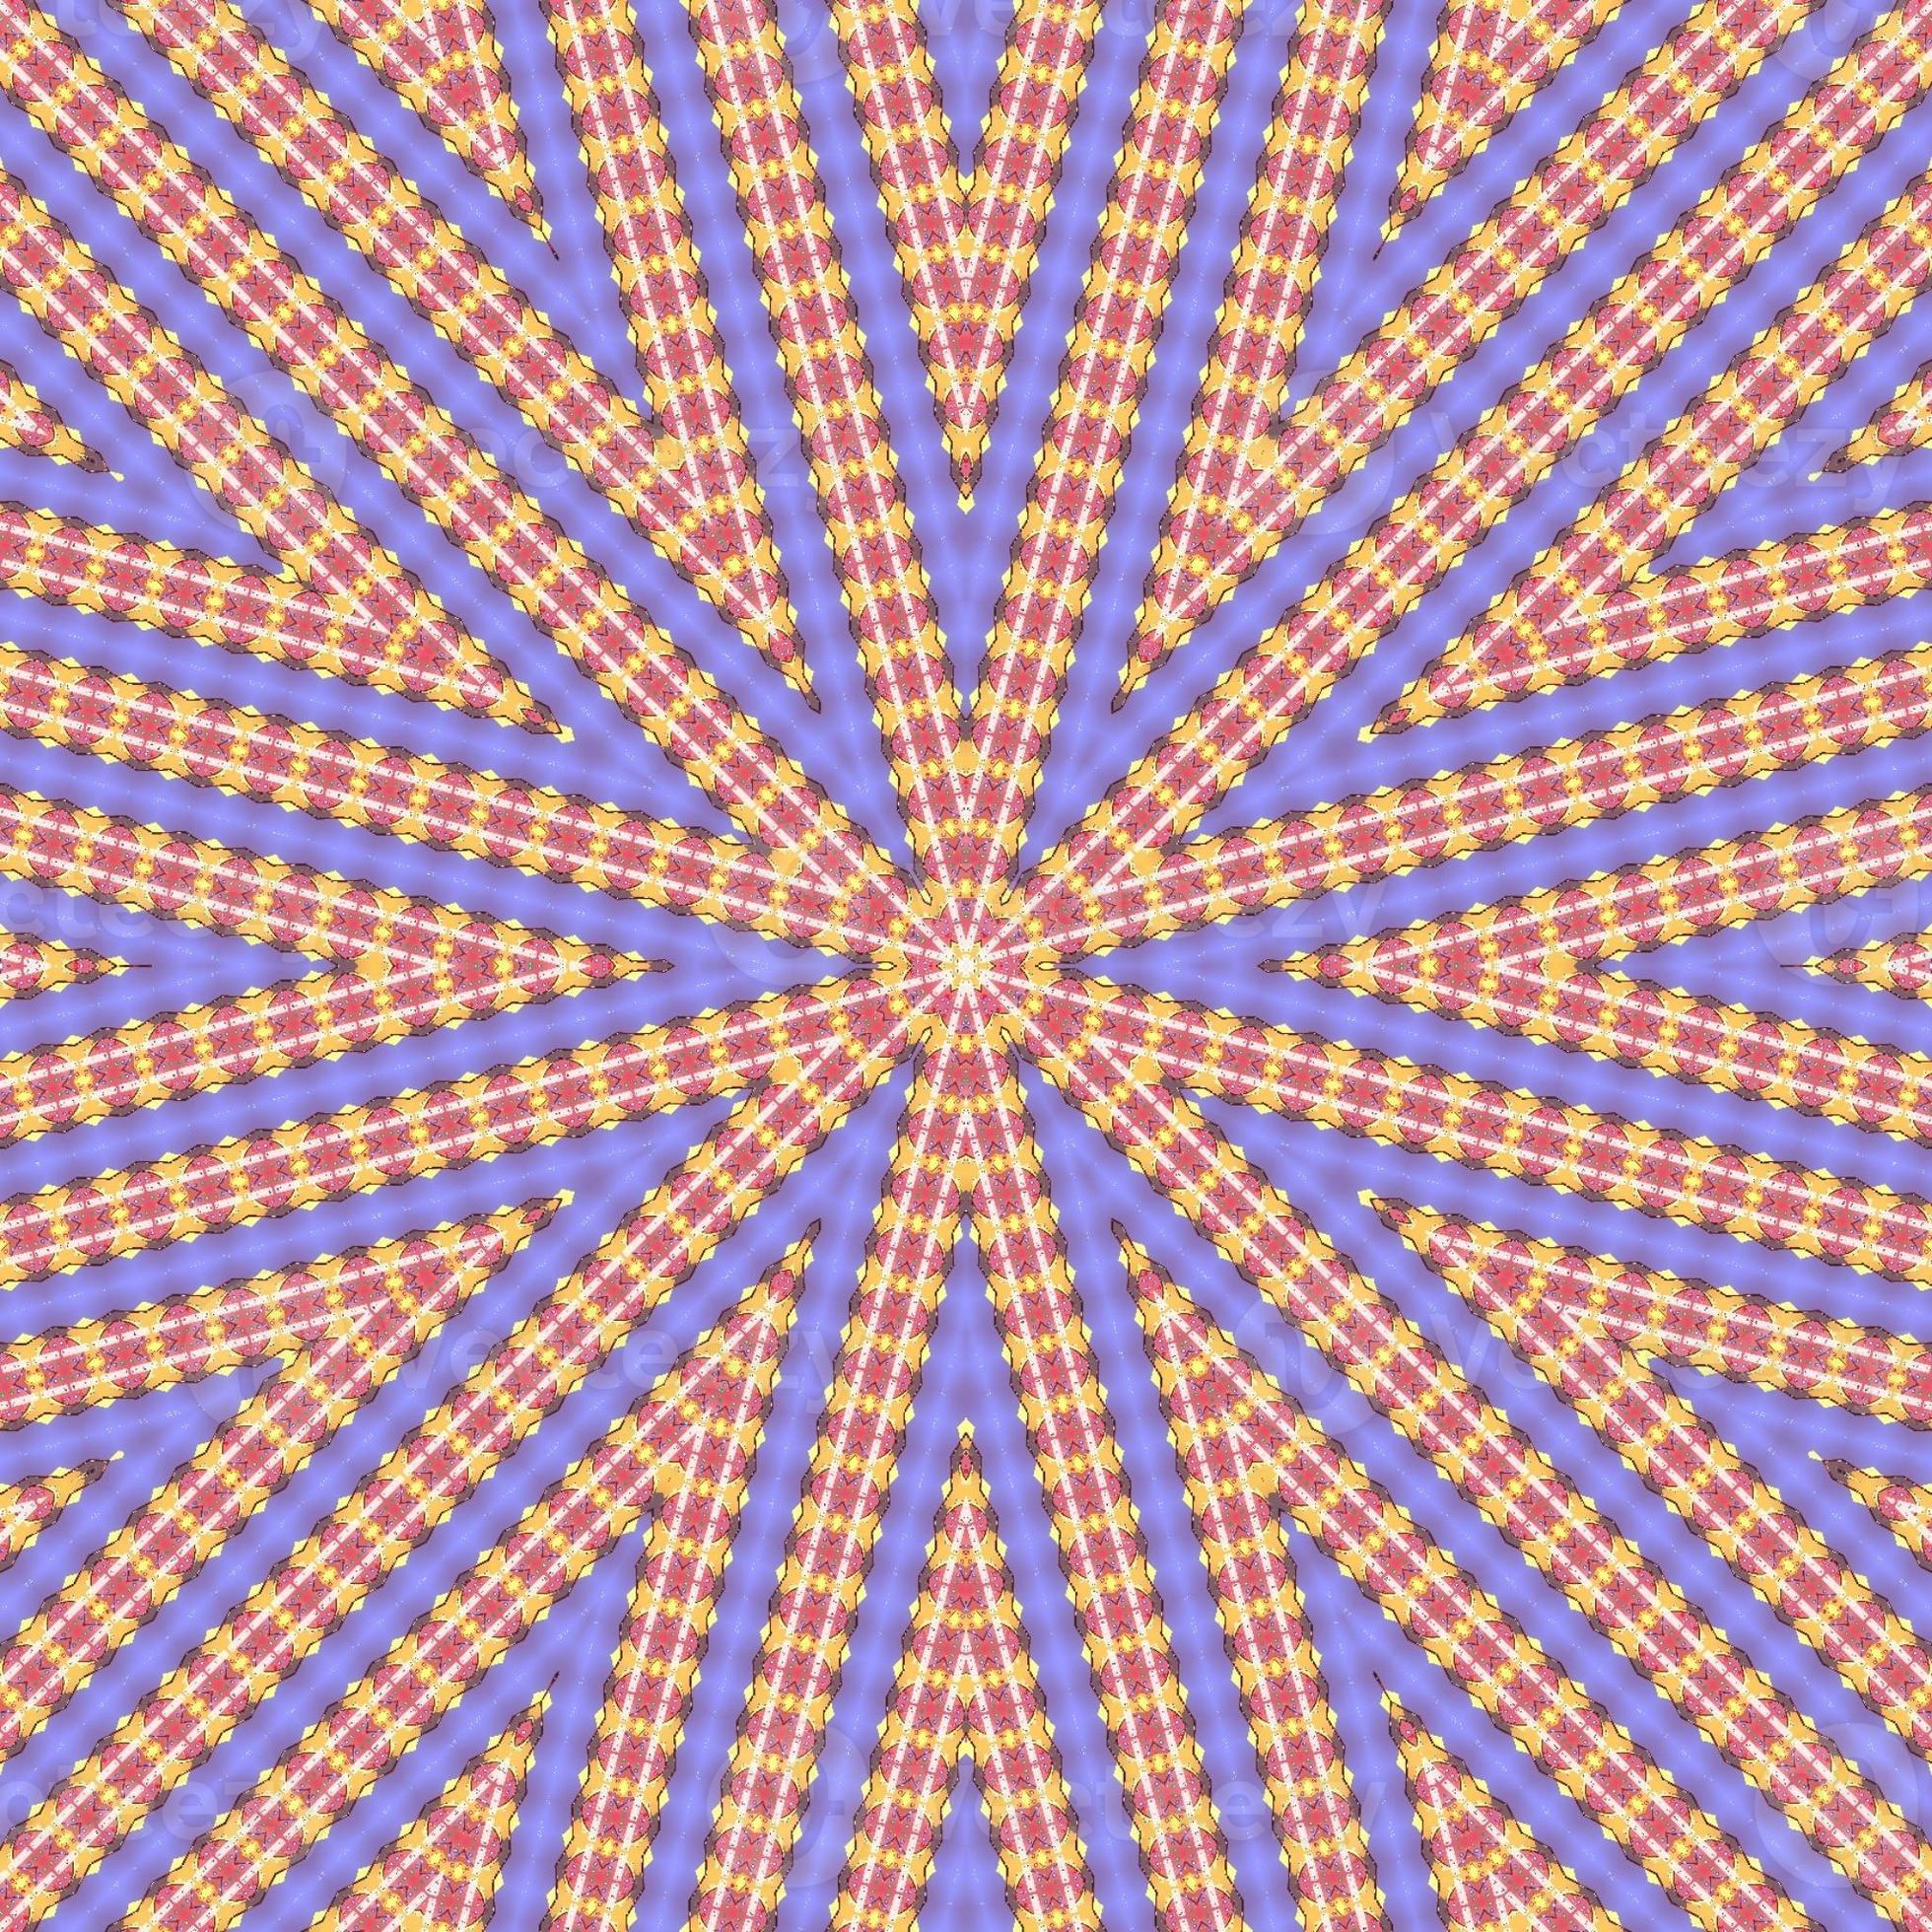 A digital image of a star burst pattern in pink, yellow, and purple. - Dark, trippy